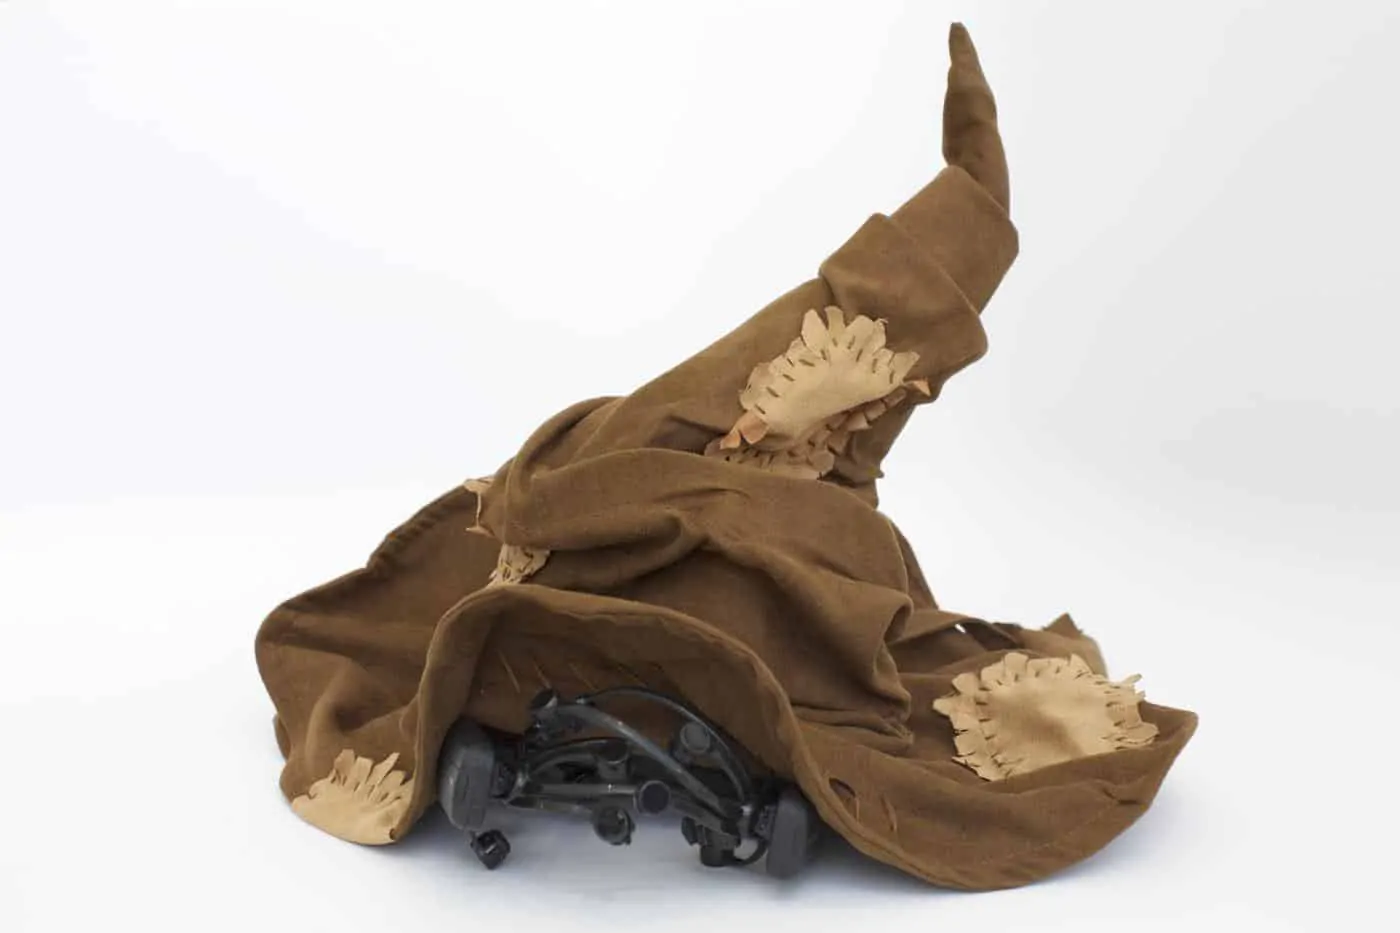 Post-doc student creates Sorting Hat capable of “reading people’s mind”